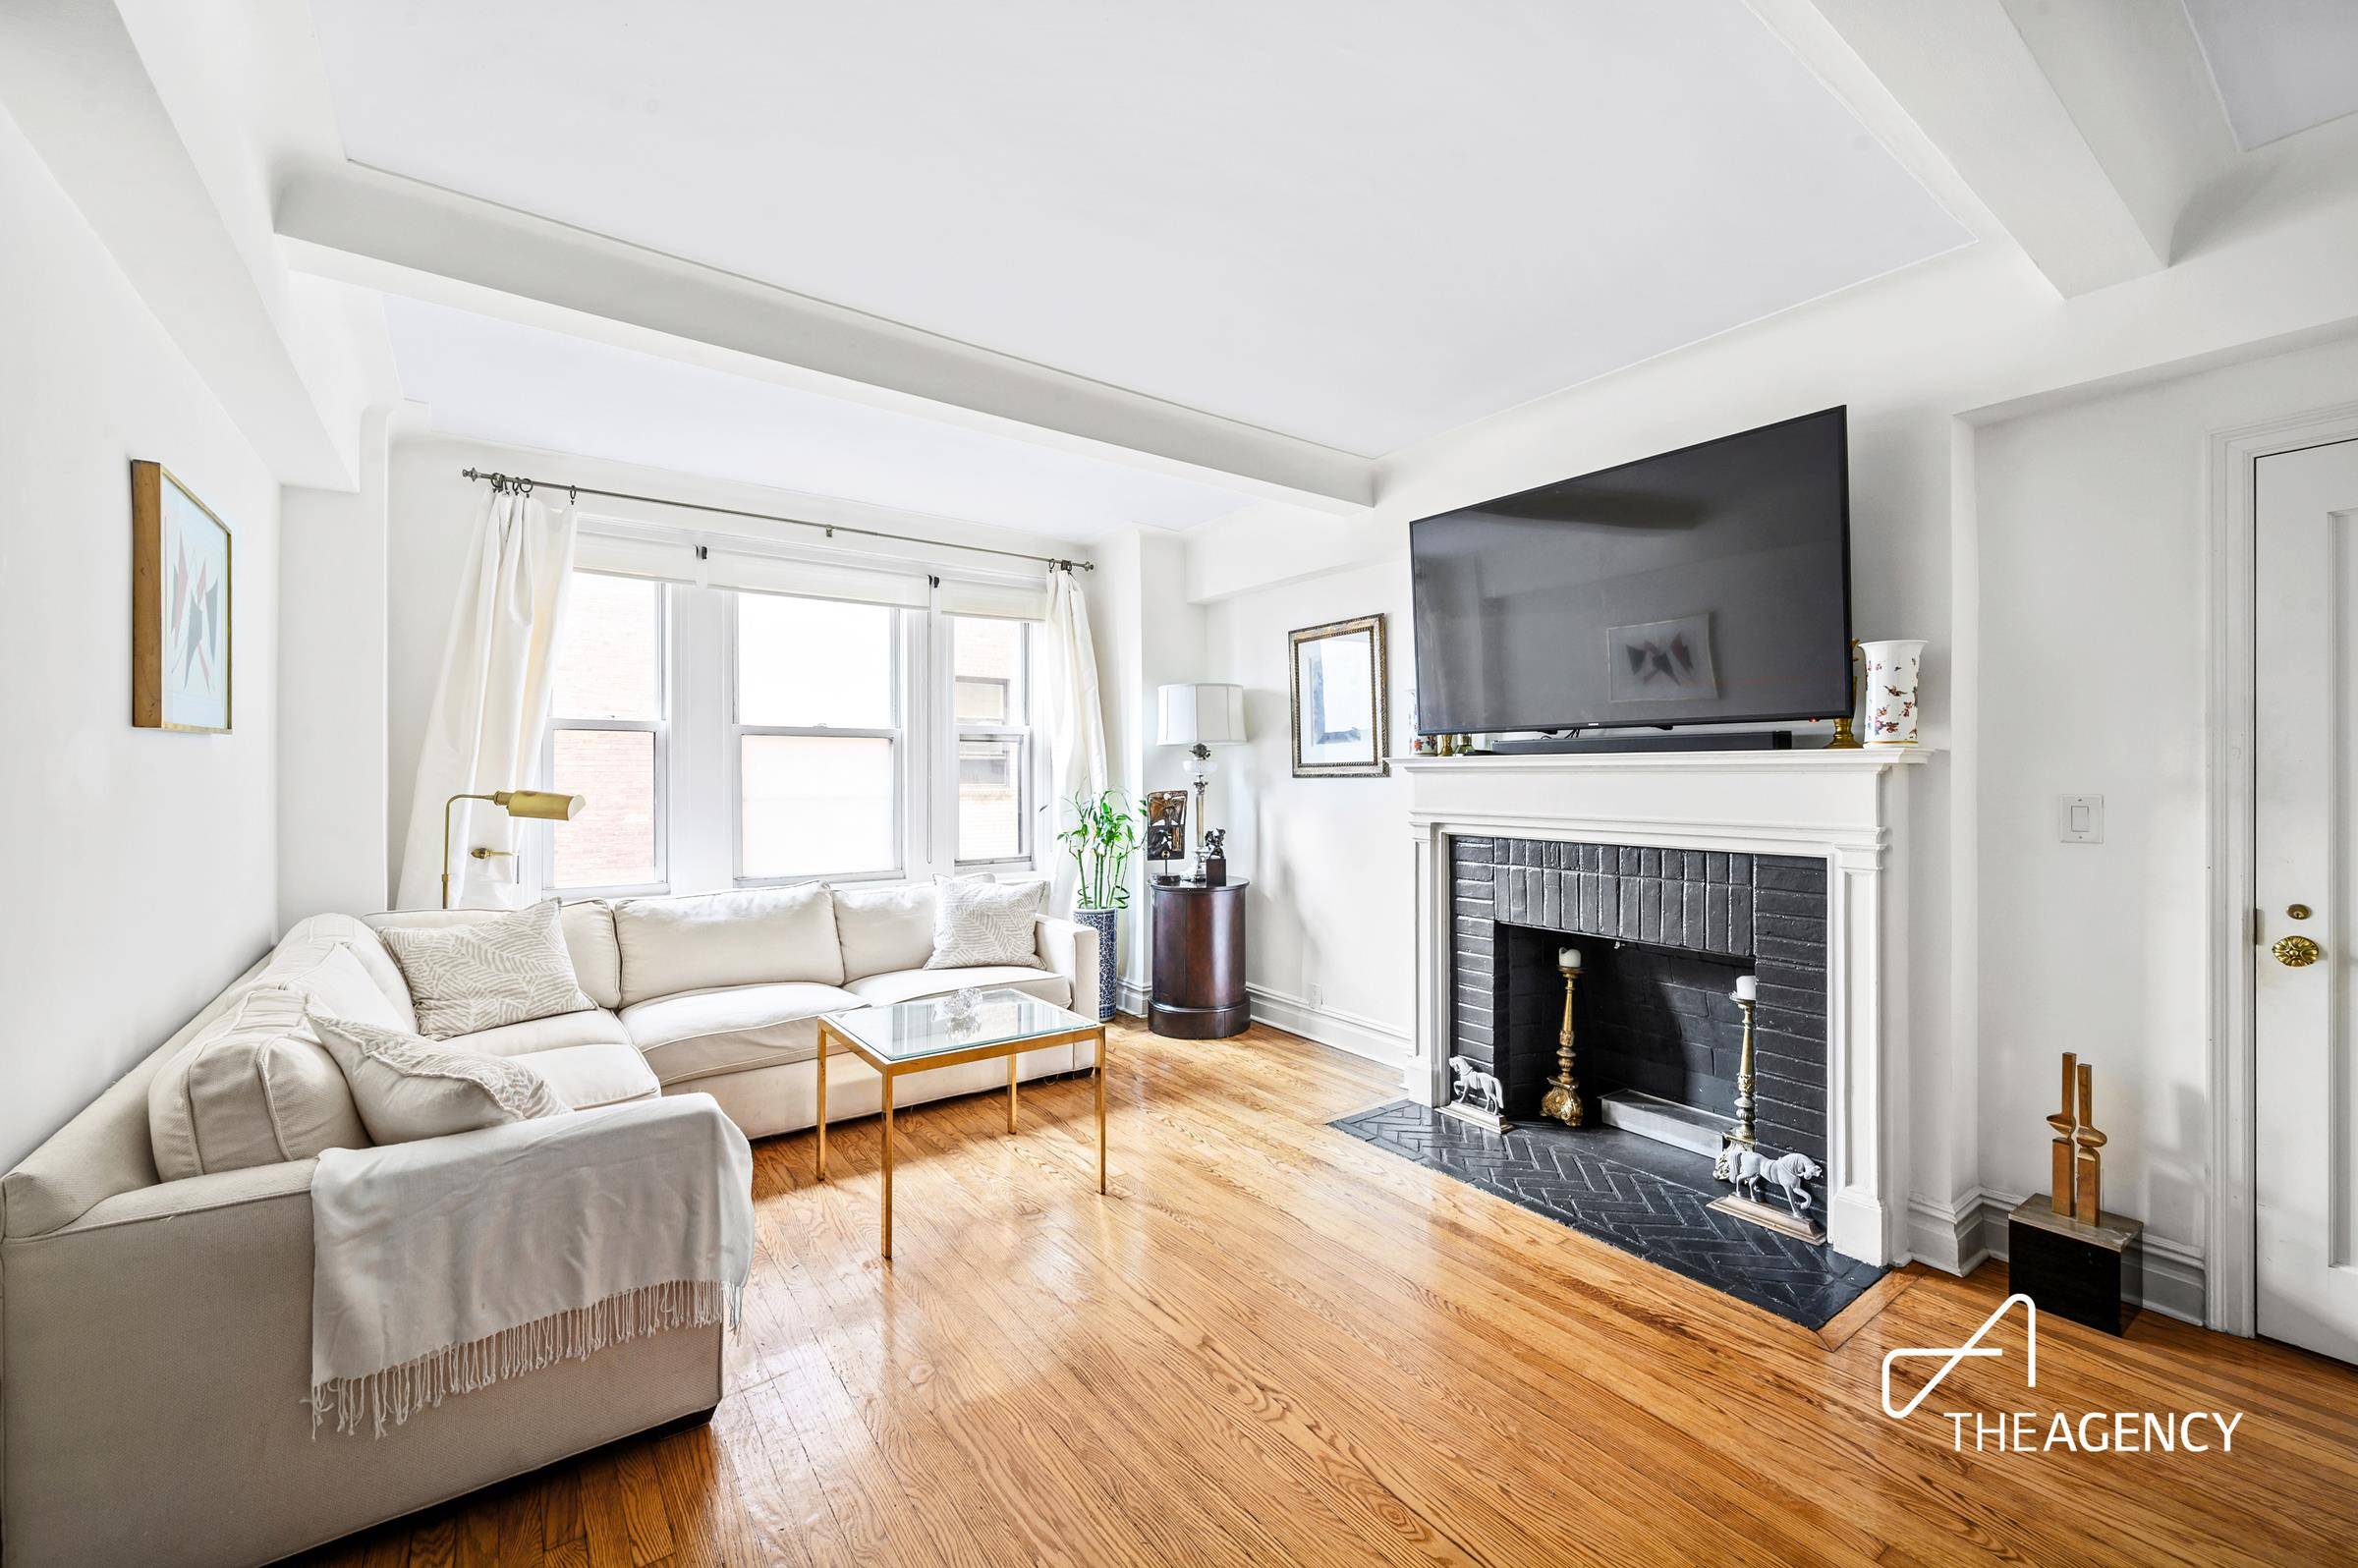 Welcome to one of the most charming one bedroom apartments in one of the most sought after pre war buildings on the Upper East Side !